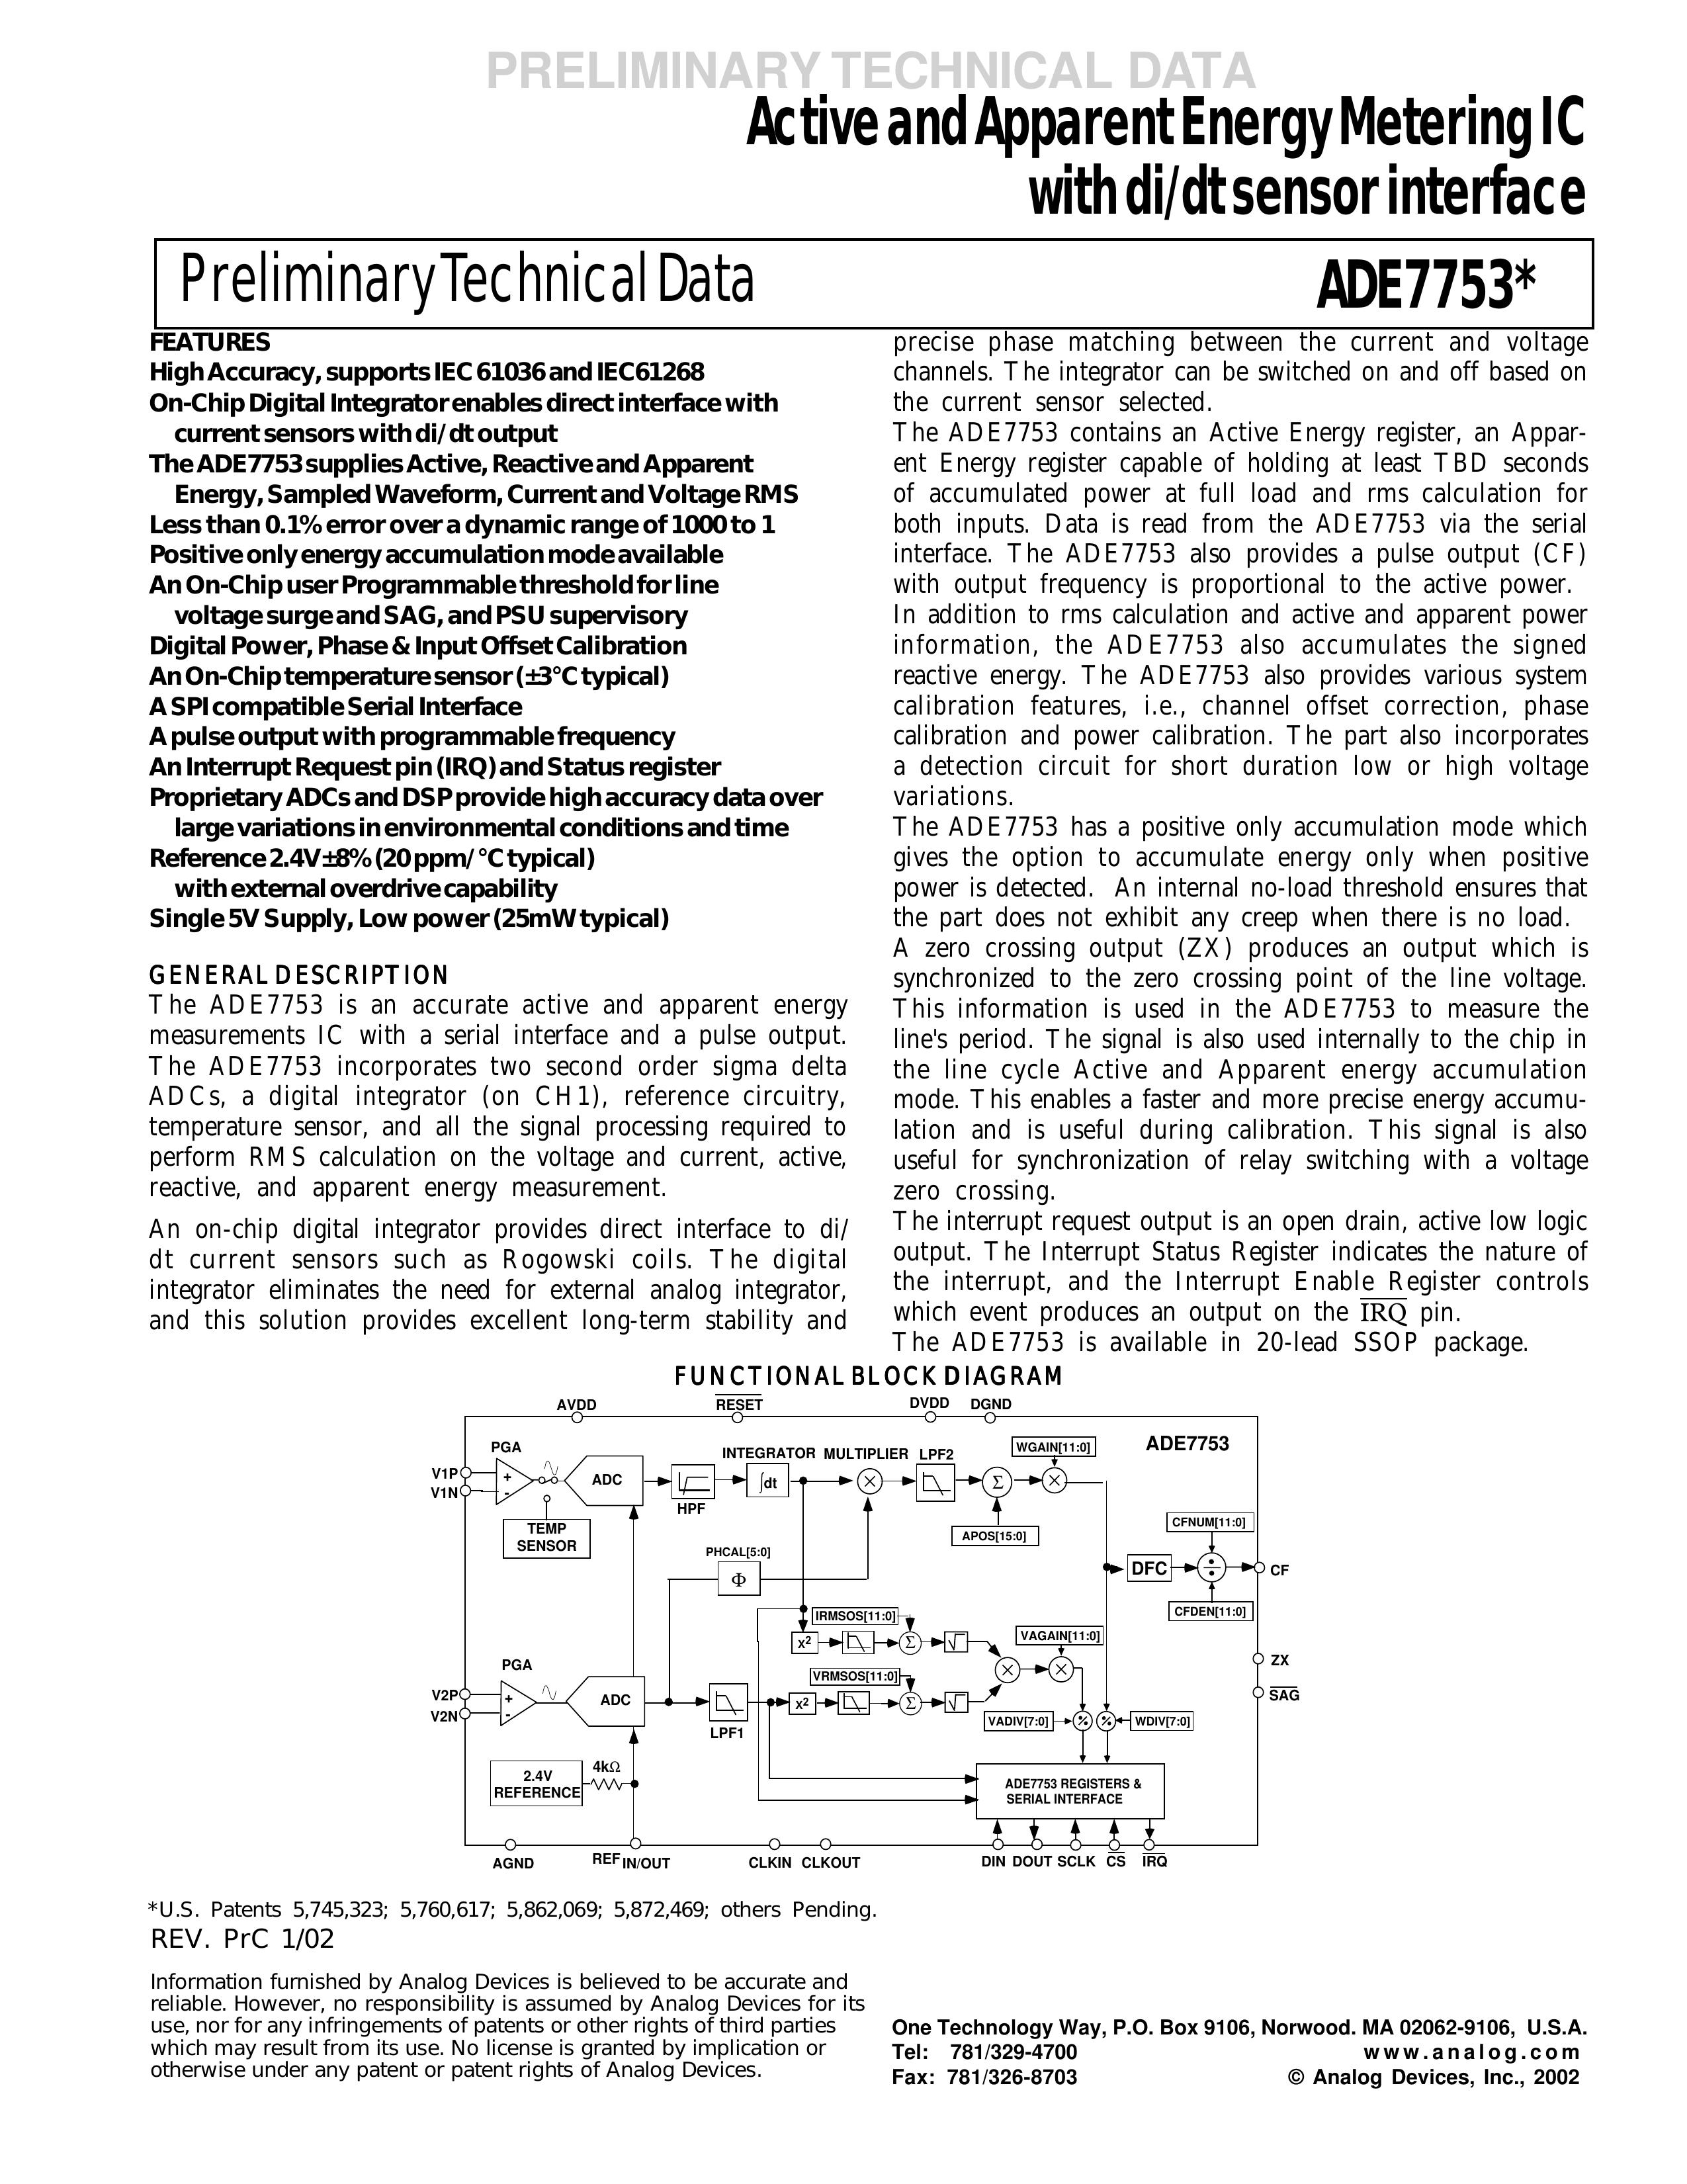 Analog Devices ADE7753 Iron User Manual (Page 1)